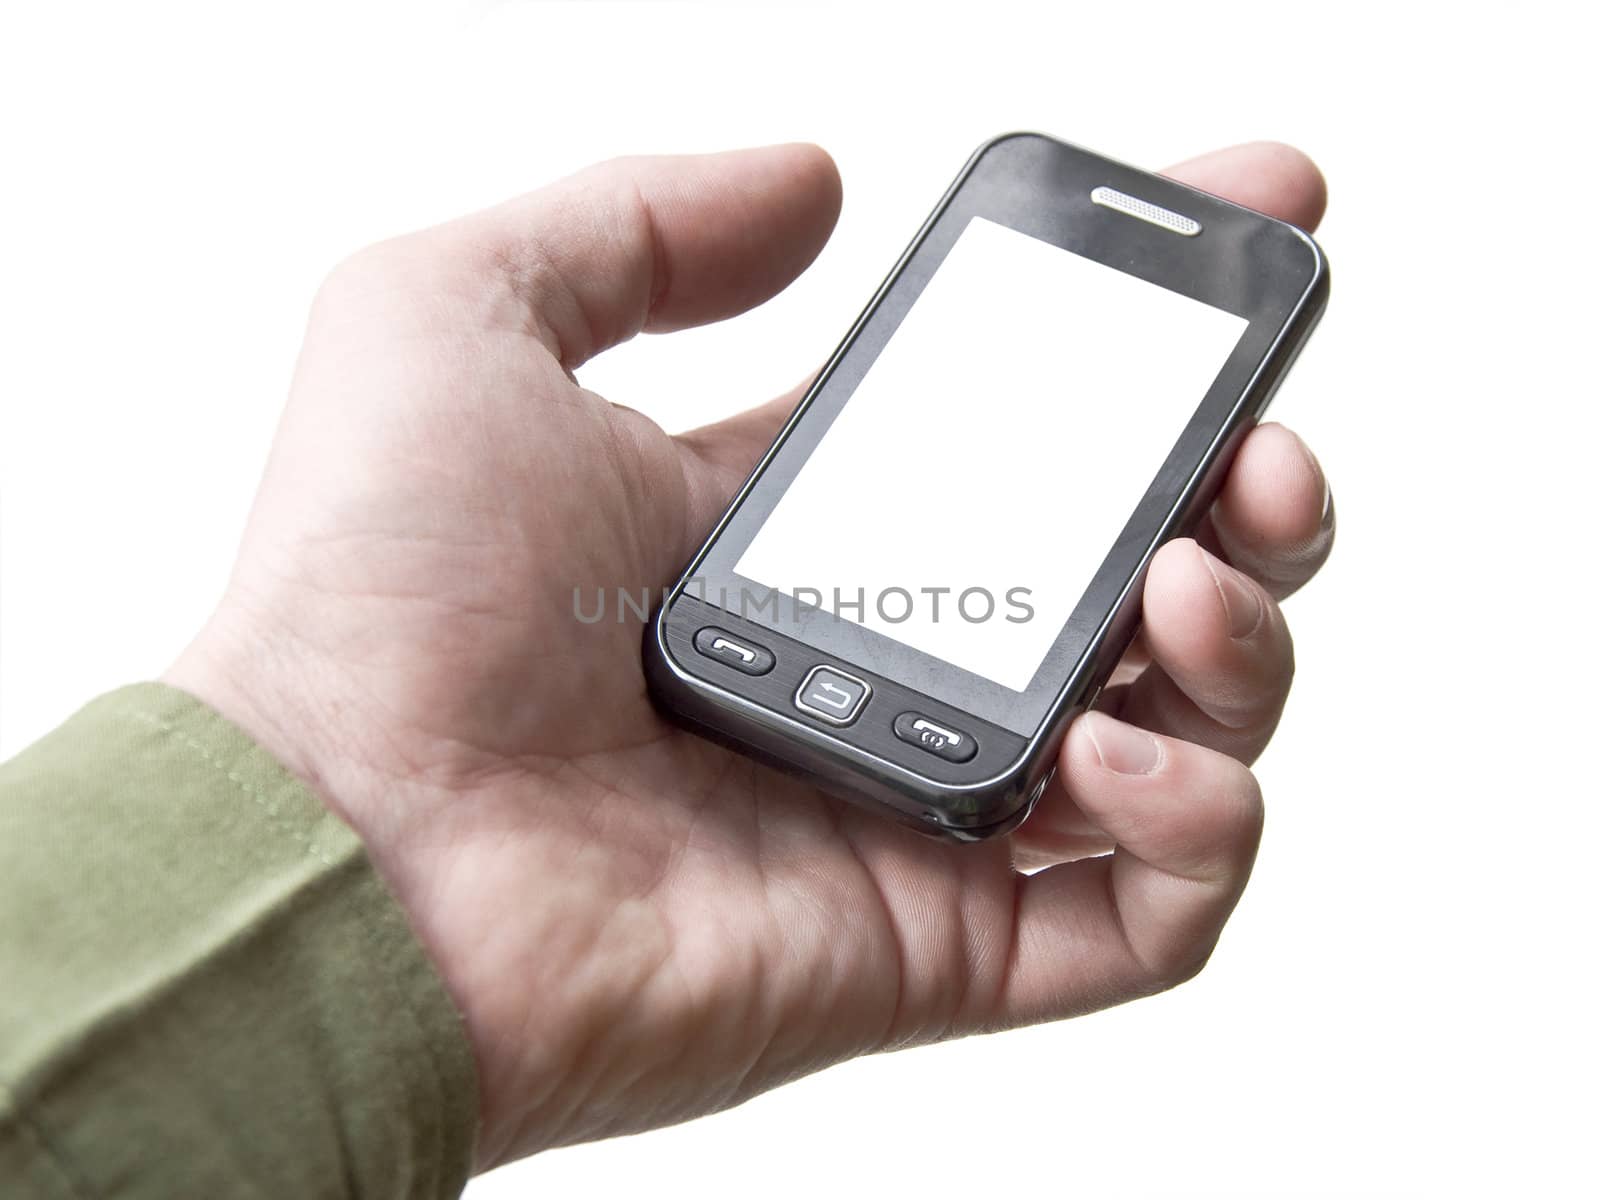 The hand holding a cell phone touchscreen. White background. White screen of the device. Isolation.